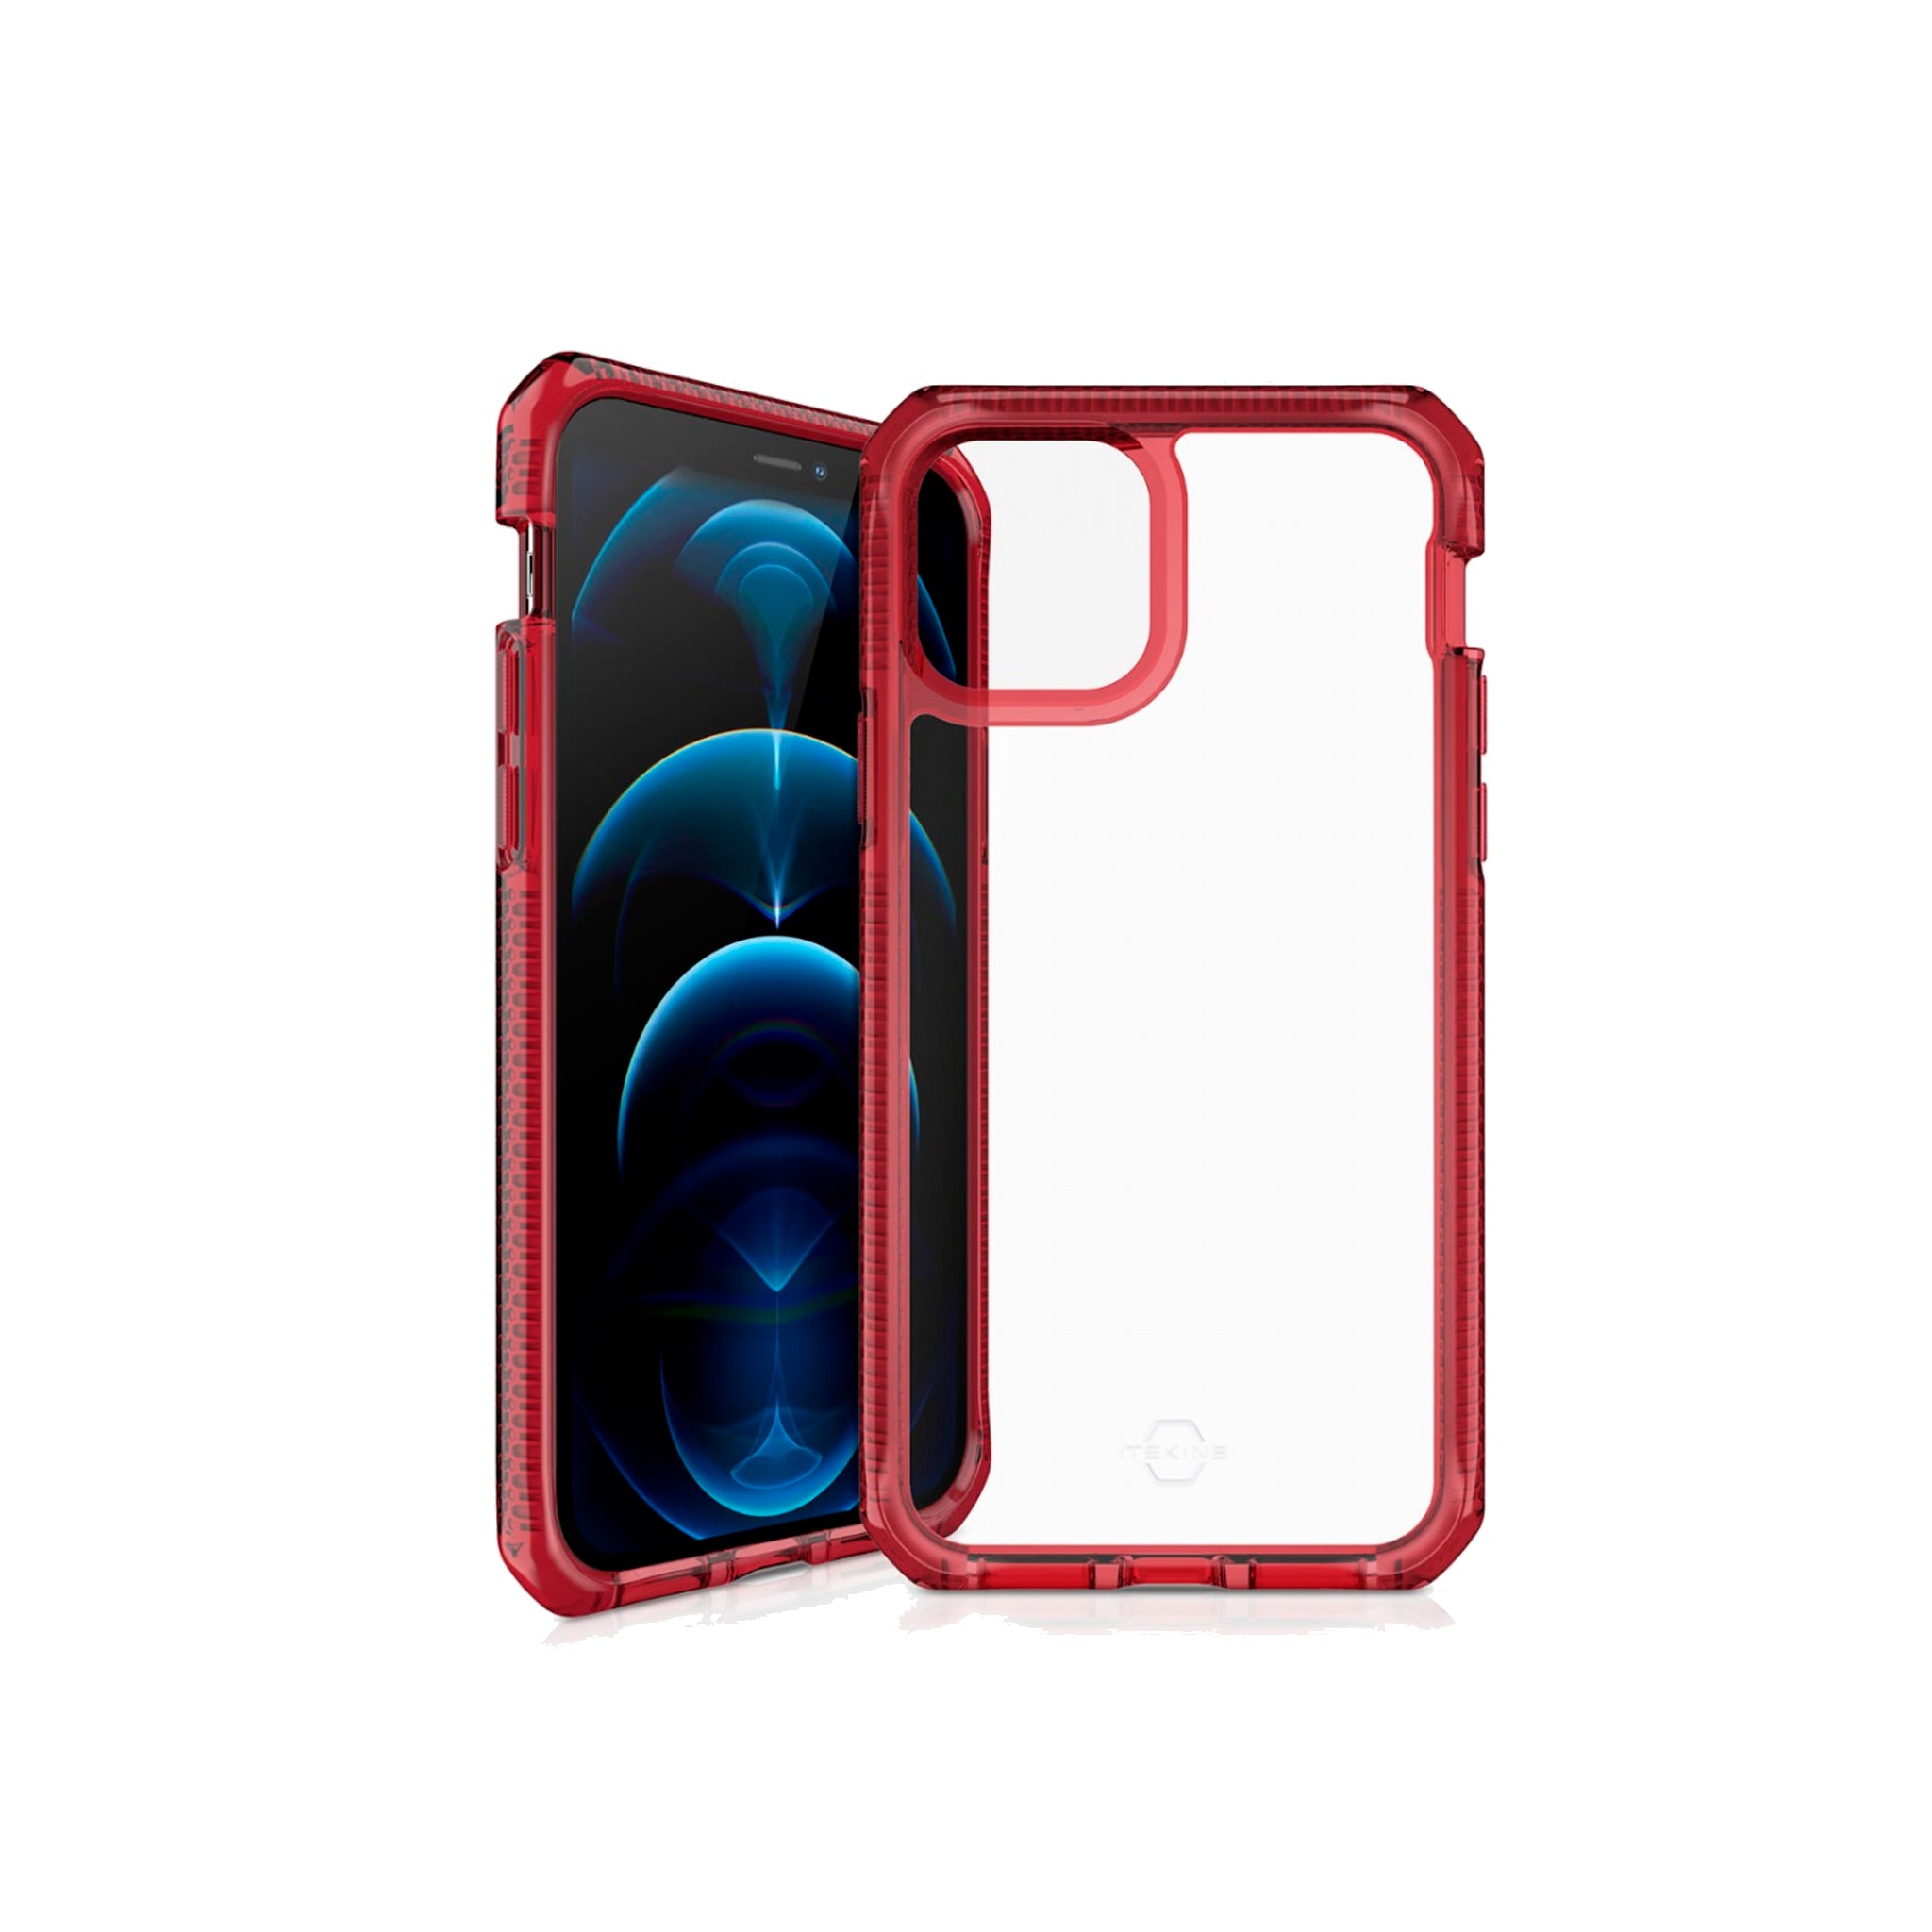 Itskins - Supreme Clear Case For Apple Iphone 12 / 12 Pro - Red And Transparent